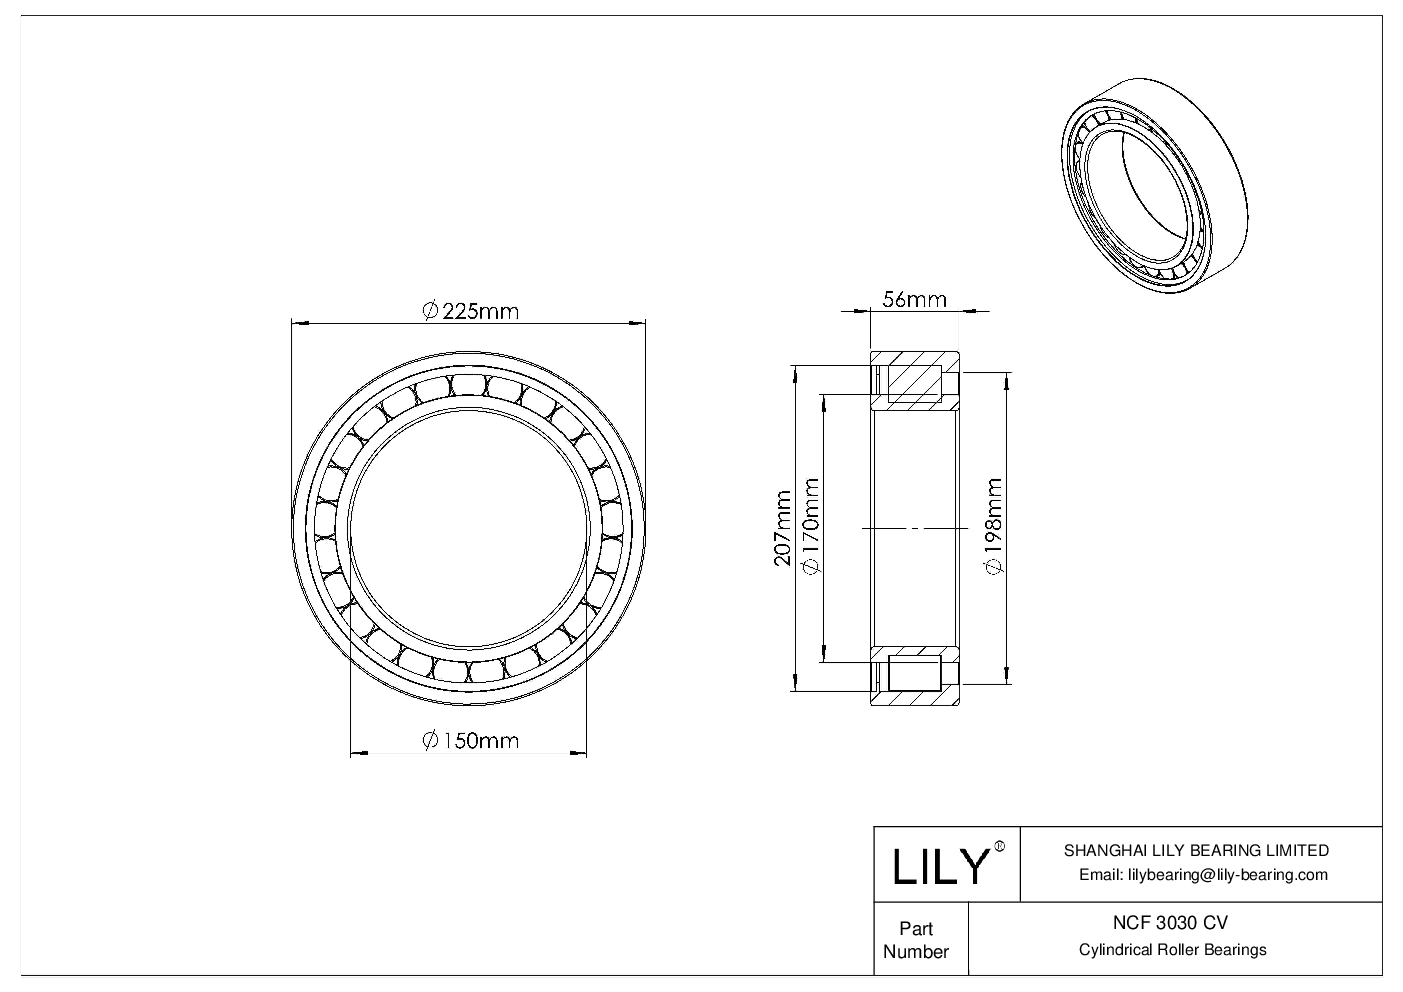 NCF 3030 CV Single Row Full Complement Cylindrical Roller Bearings cad drawing